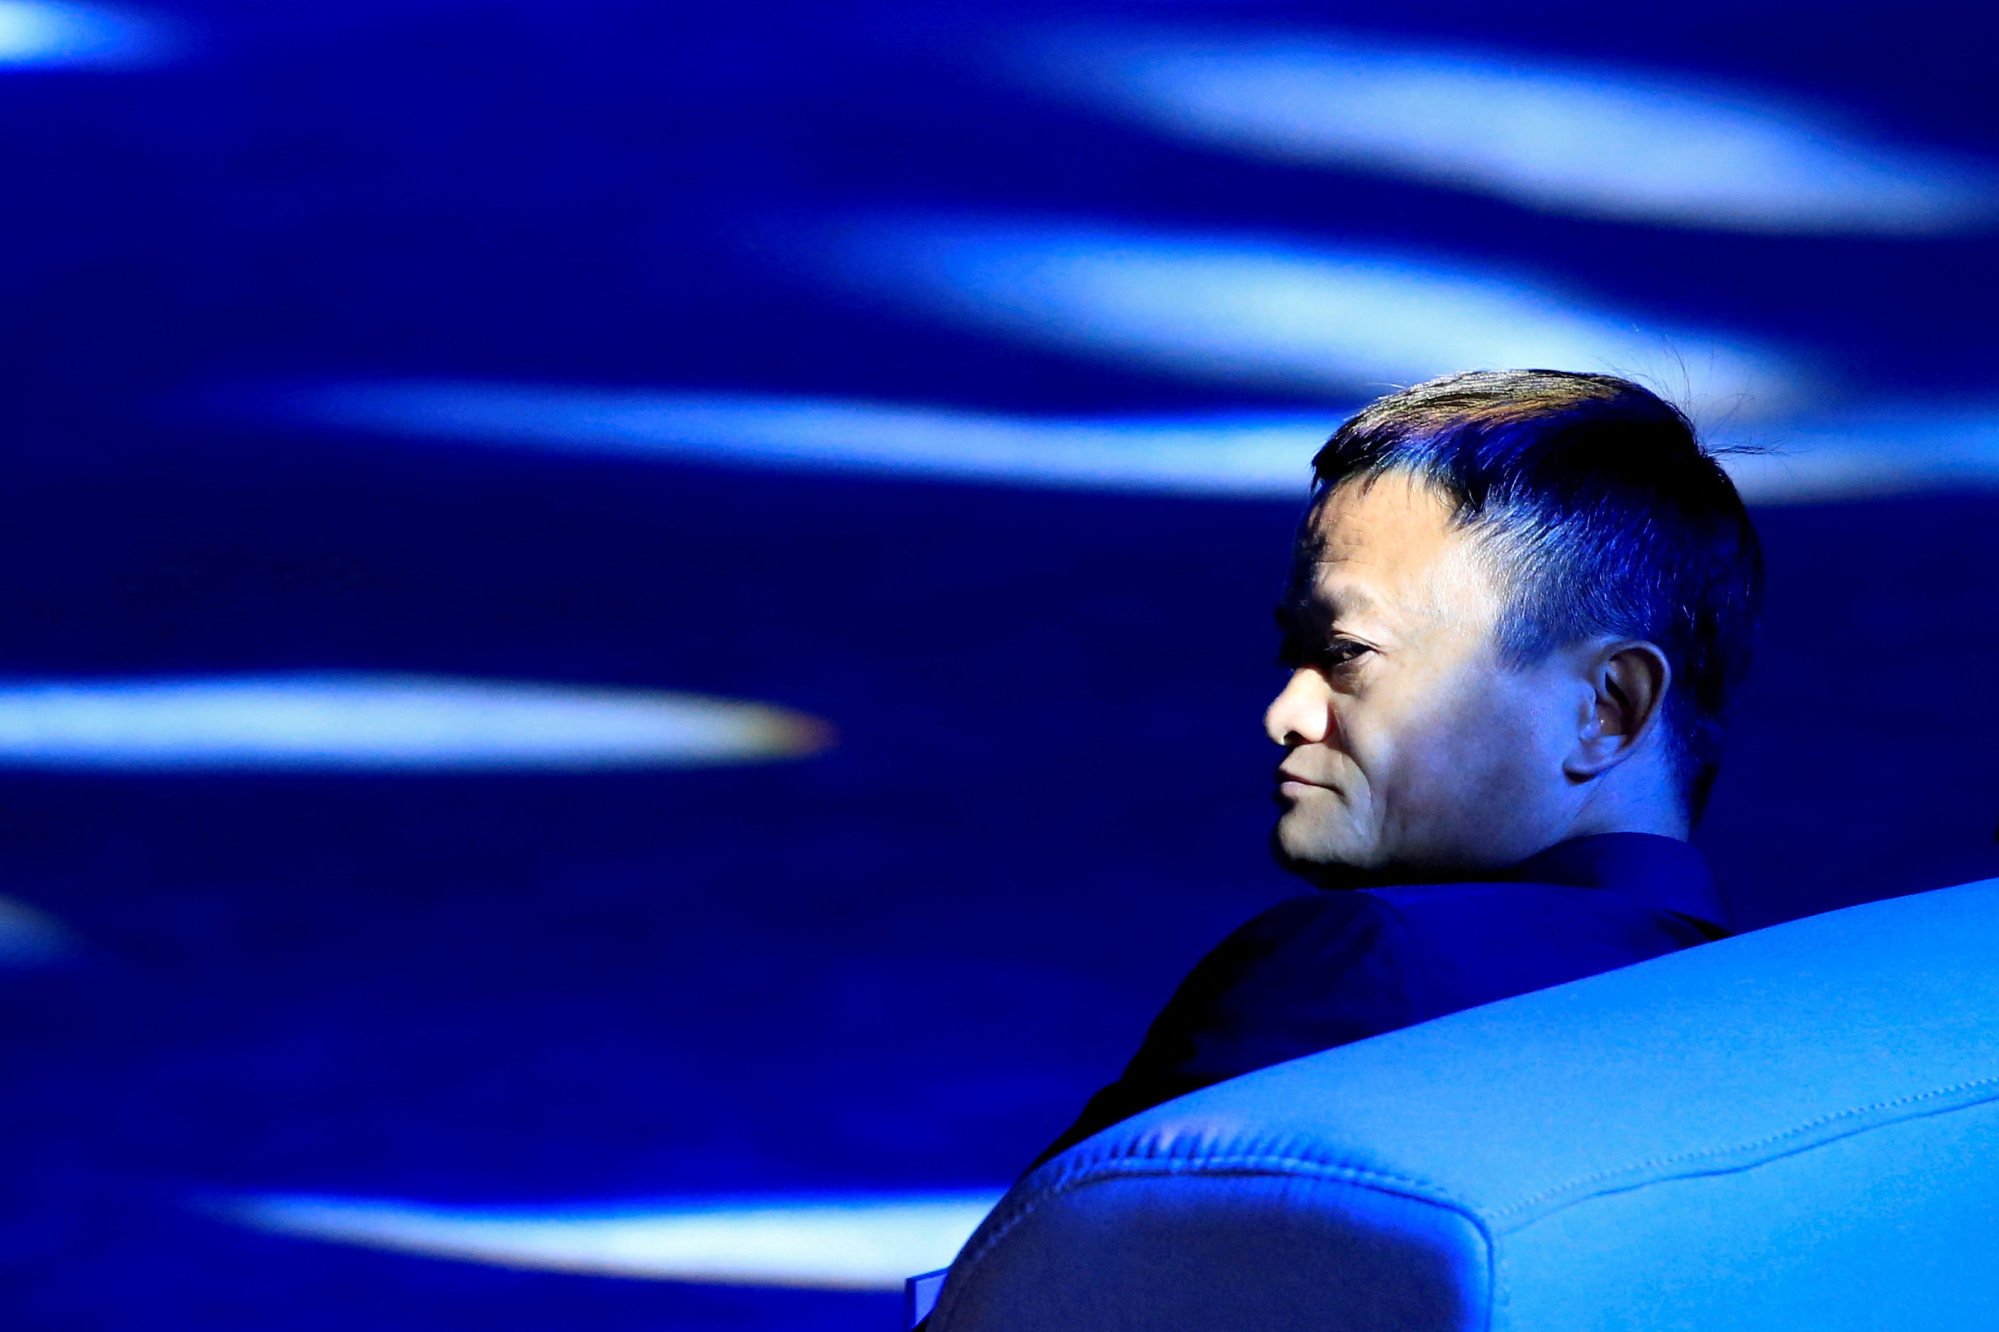 Alibaba founder Jack Ma attends the World Artificial Intelligence Conference (WAIC) in Shanghai, in this file photo dated September 17, 2018. Photo: Reuters